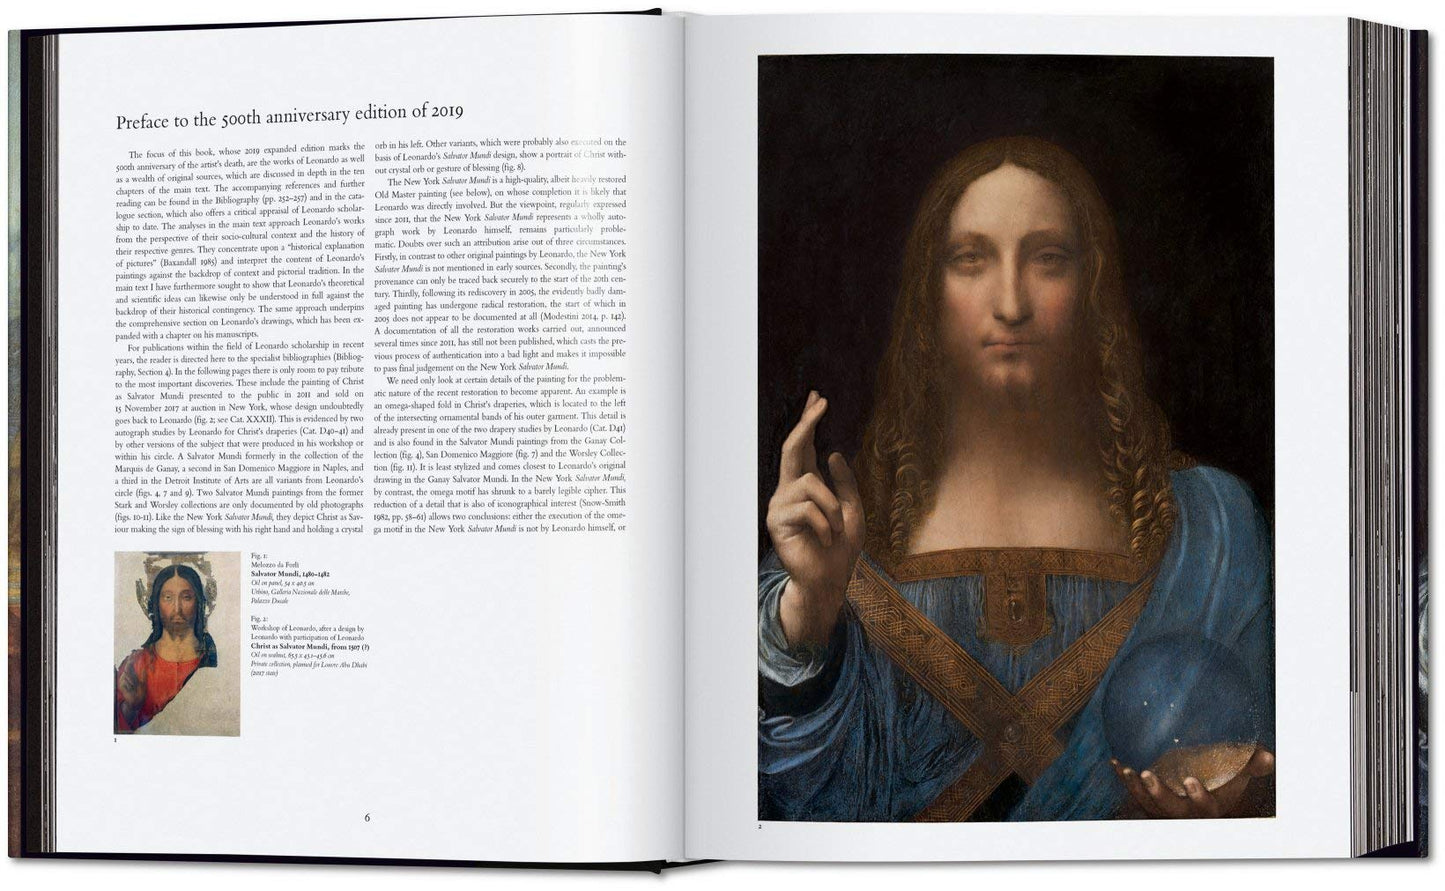 Leonardo. The Complete Paintings and Drawings